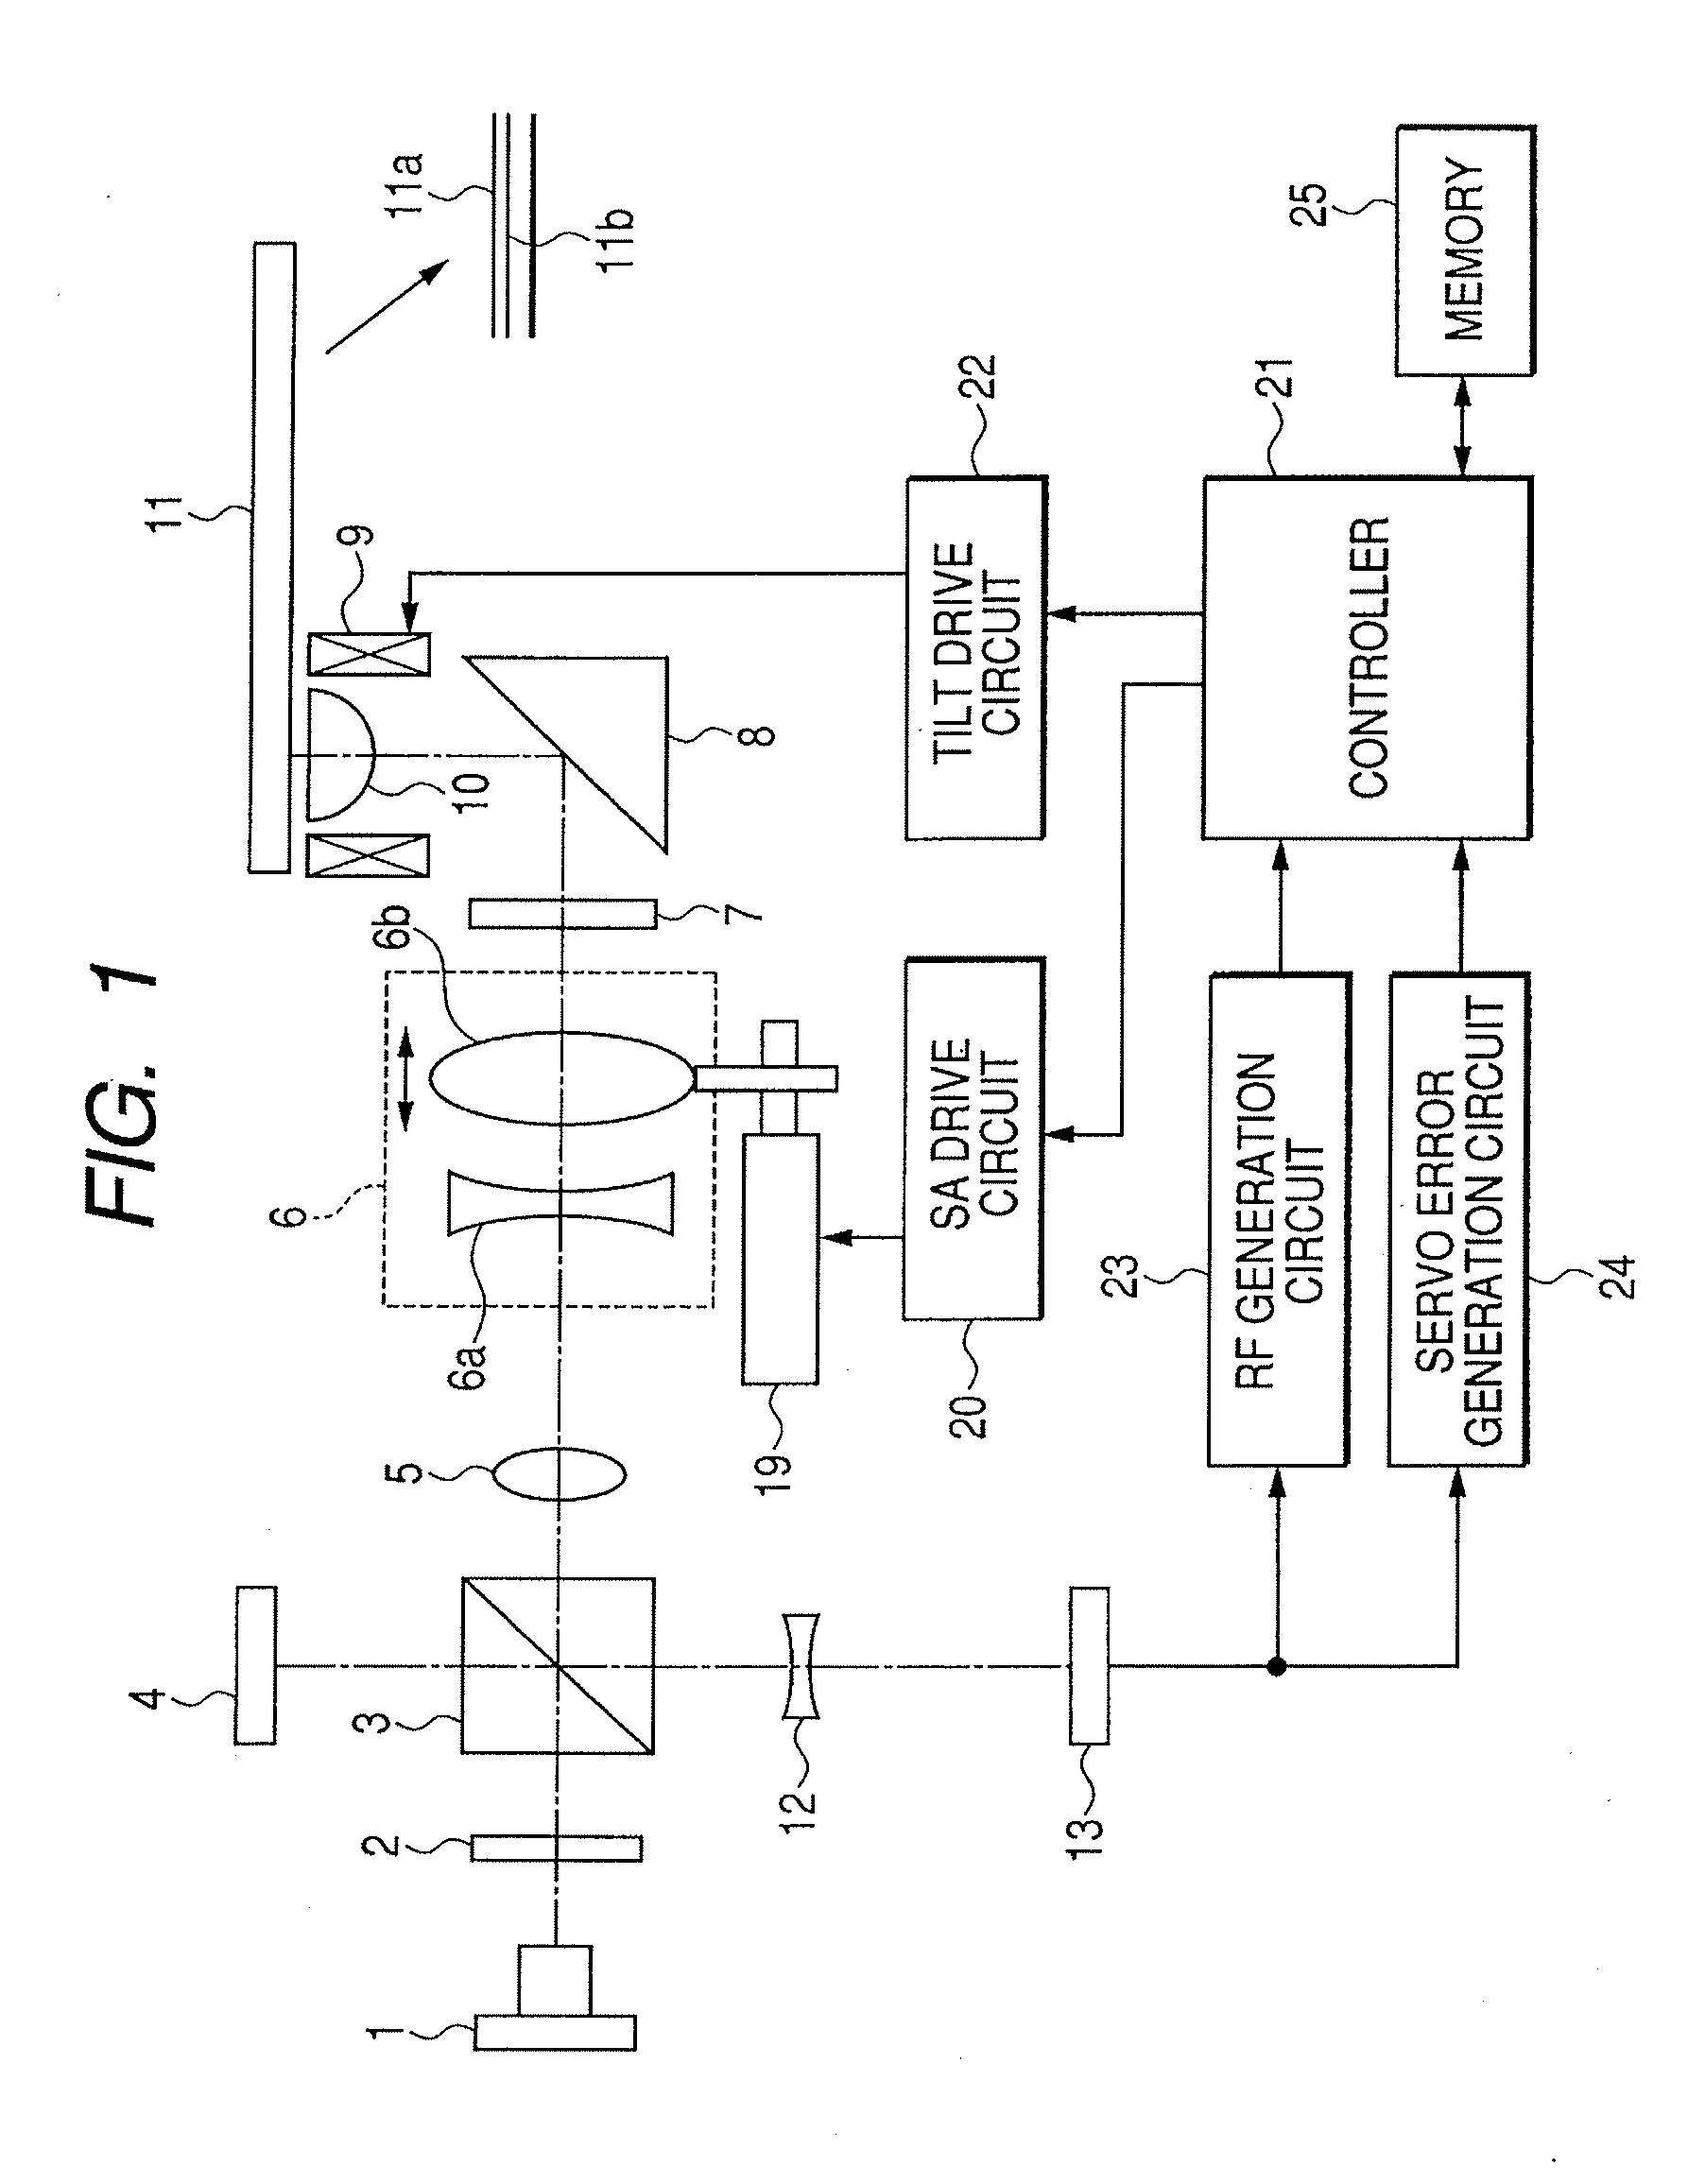 Optical information recording and reproducing apparatus capable of coma aberration correction